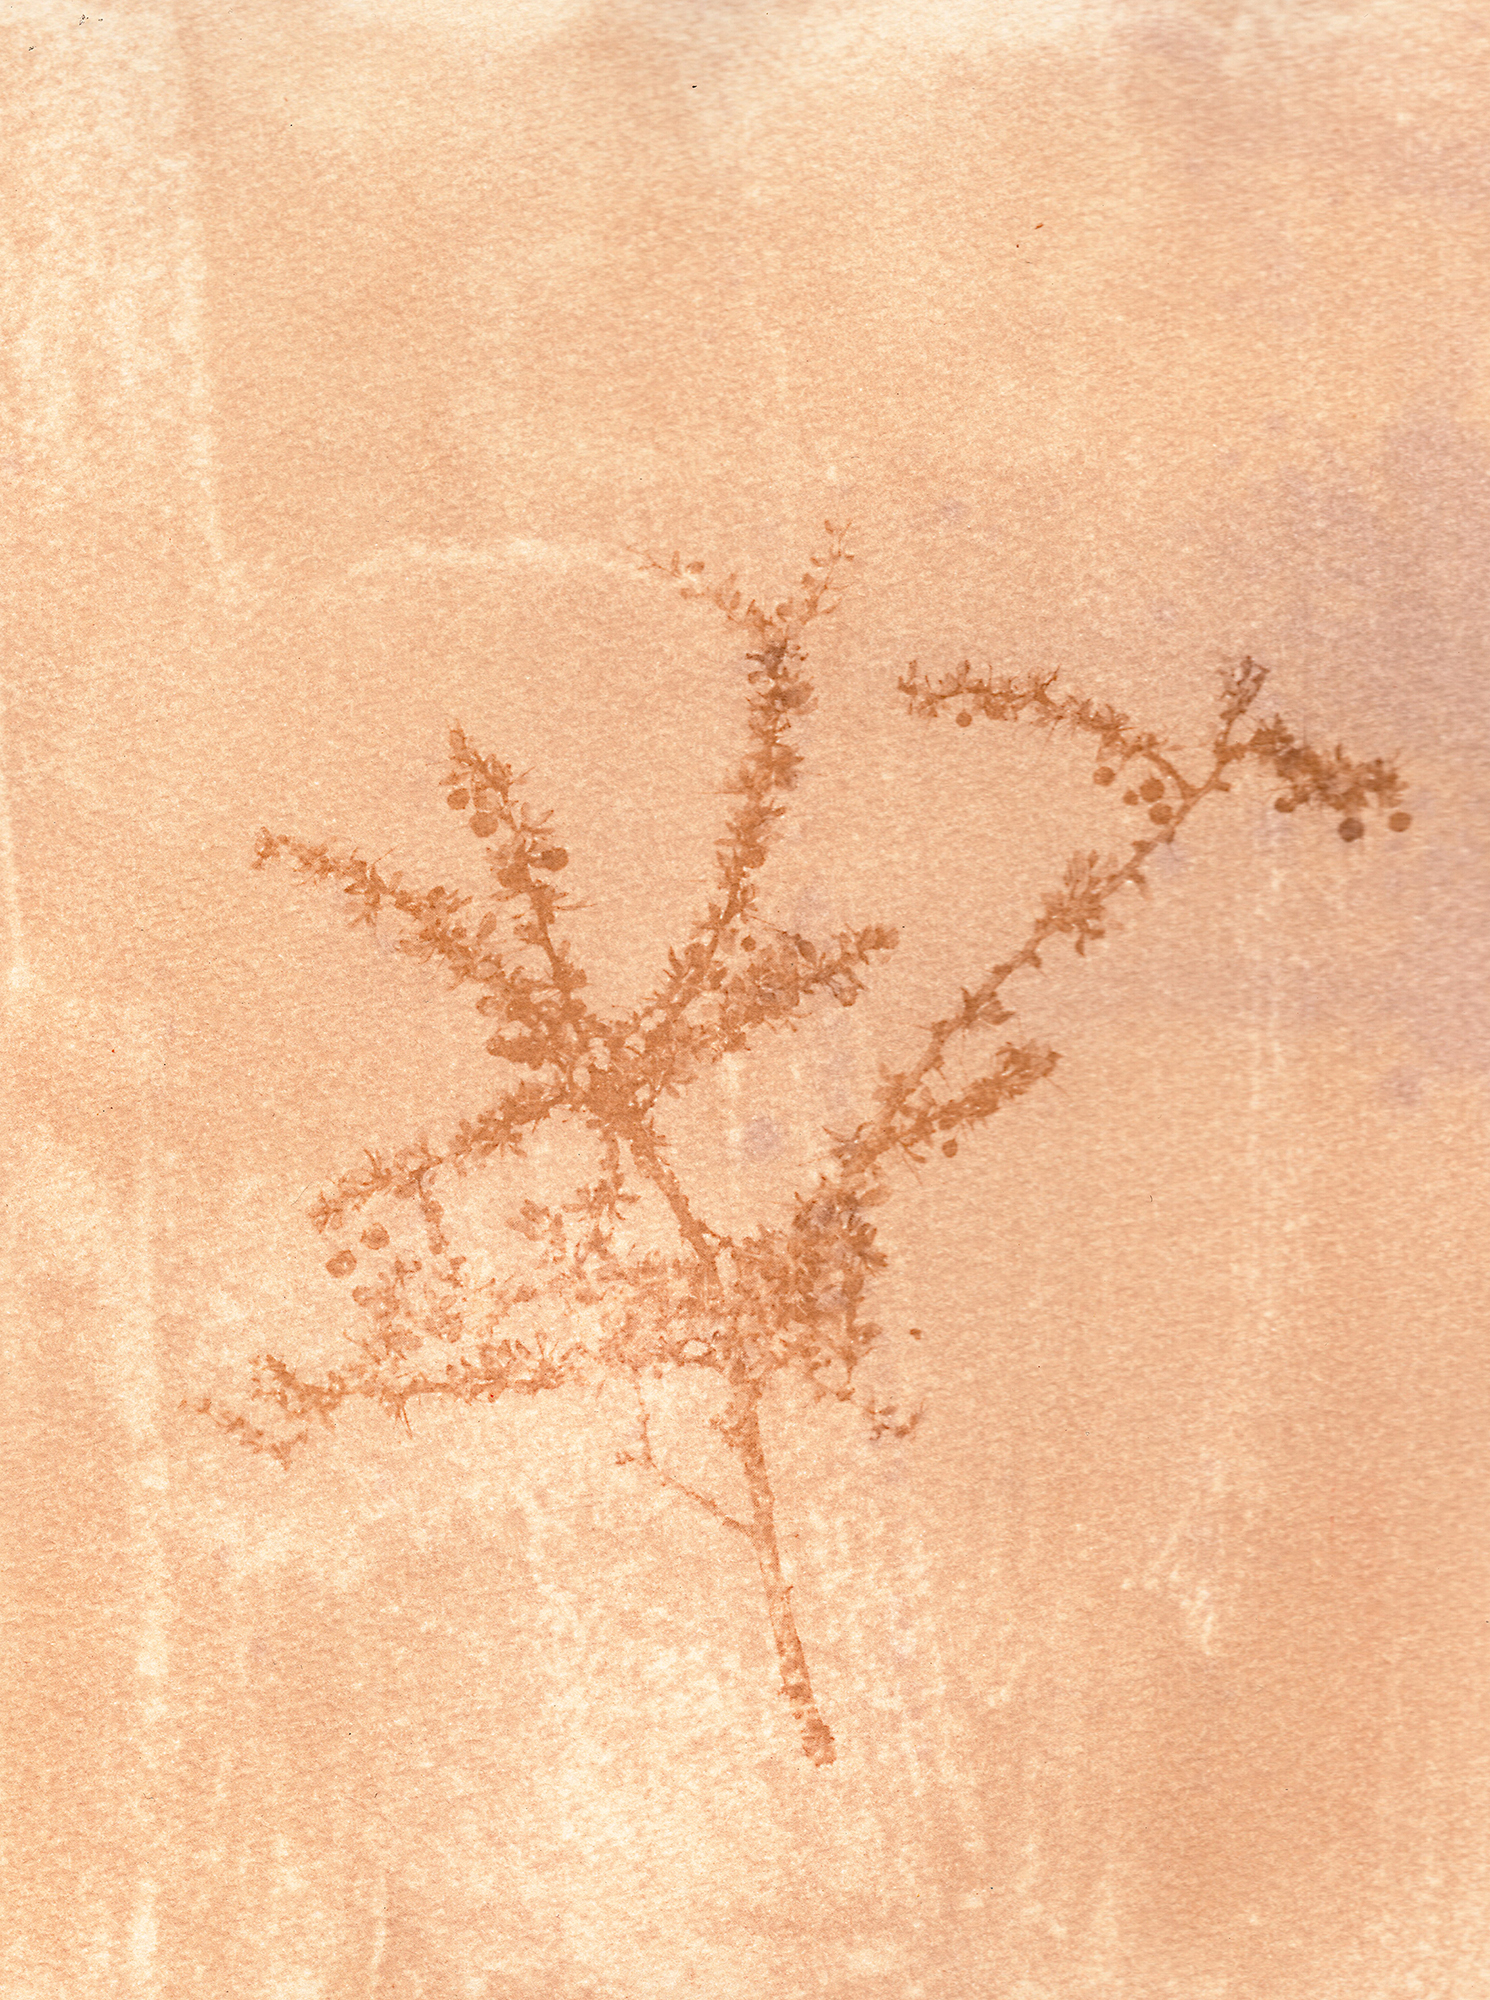  Detail of Calafate, an autochthonous and symbolic plant of the Island of Tierra del Fuego, used to create natural dyes used by the "Hilanderas del Fin del Mundo", a group of women dedicated to retake traditions of embroidery and weaving by invoking 